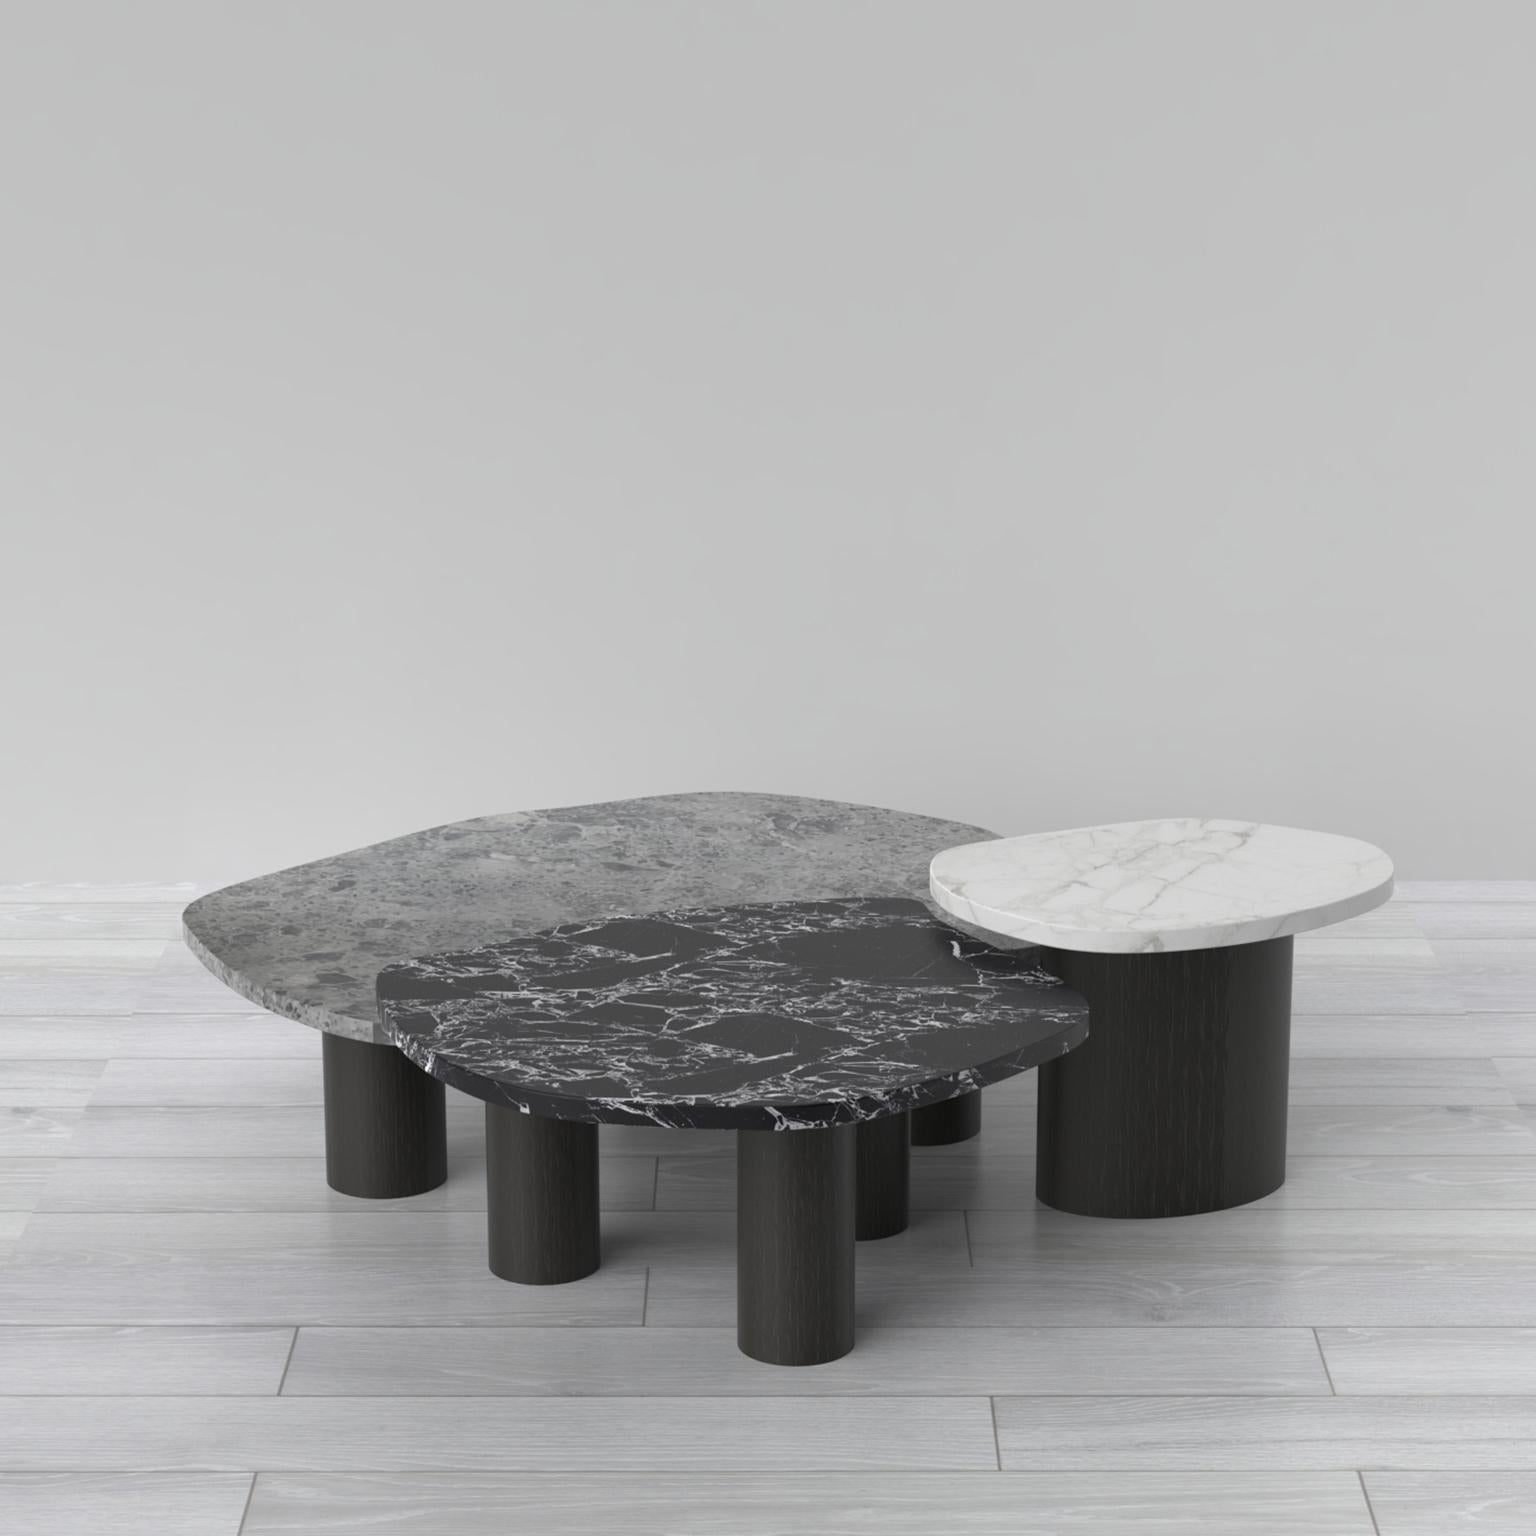 Flow Coffee Tables Outdoors, Contemporary Collection, Handcrafted in Portugal - Europe by Greenapple.

Inspired by nature's organic lines and movements, this low table set adds a contemporary aesthetic to every living space. Its flowing form creates